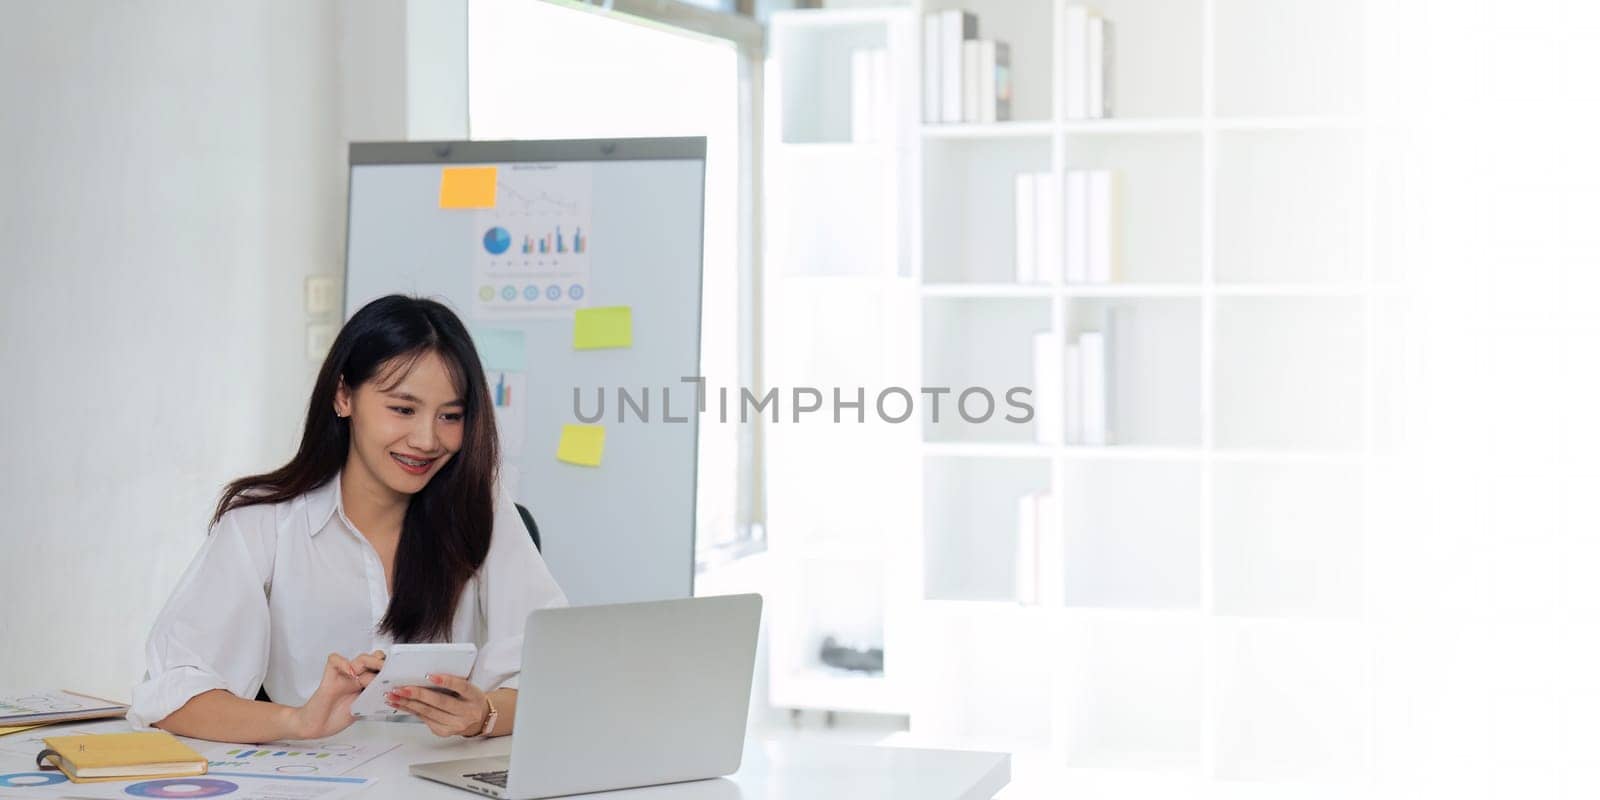 Businesswoman using a calculator to calculate numbers on a company's financial documents, she is analyzing historical financial data to plan how to grow the company. Financial concept.